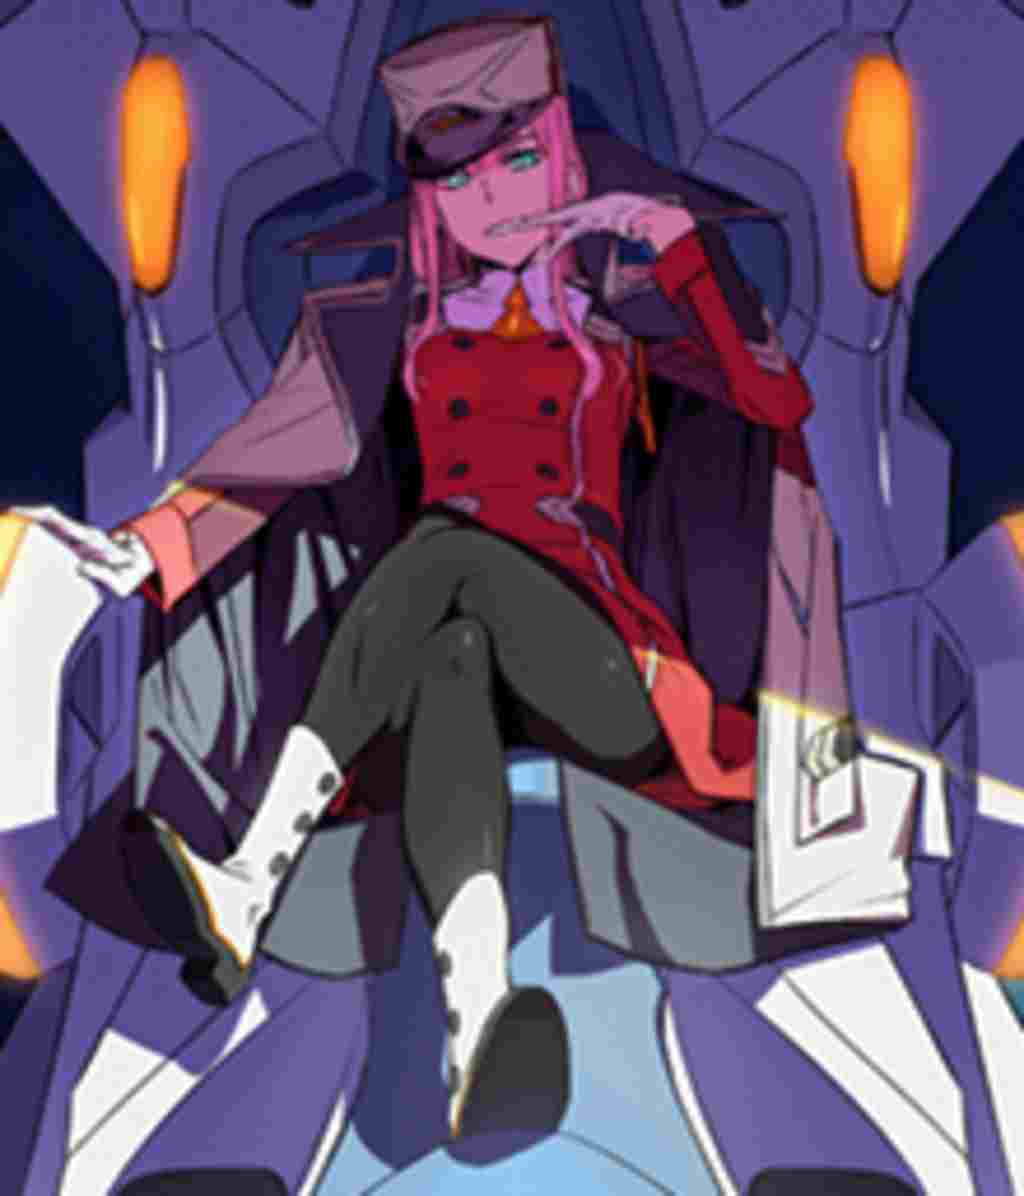 nho-cac-ban-ve-zero-two-trong-anime-darling-in-the-fran